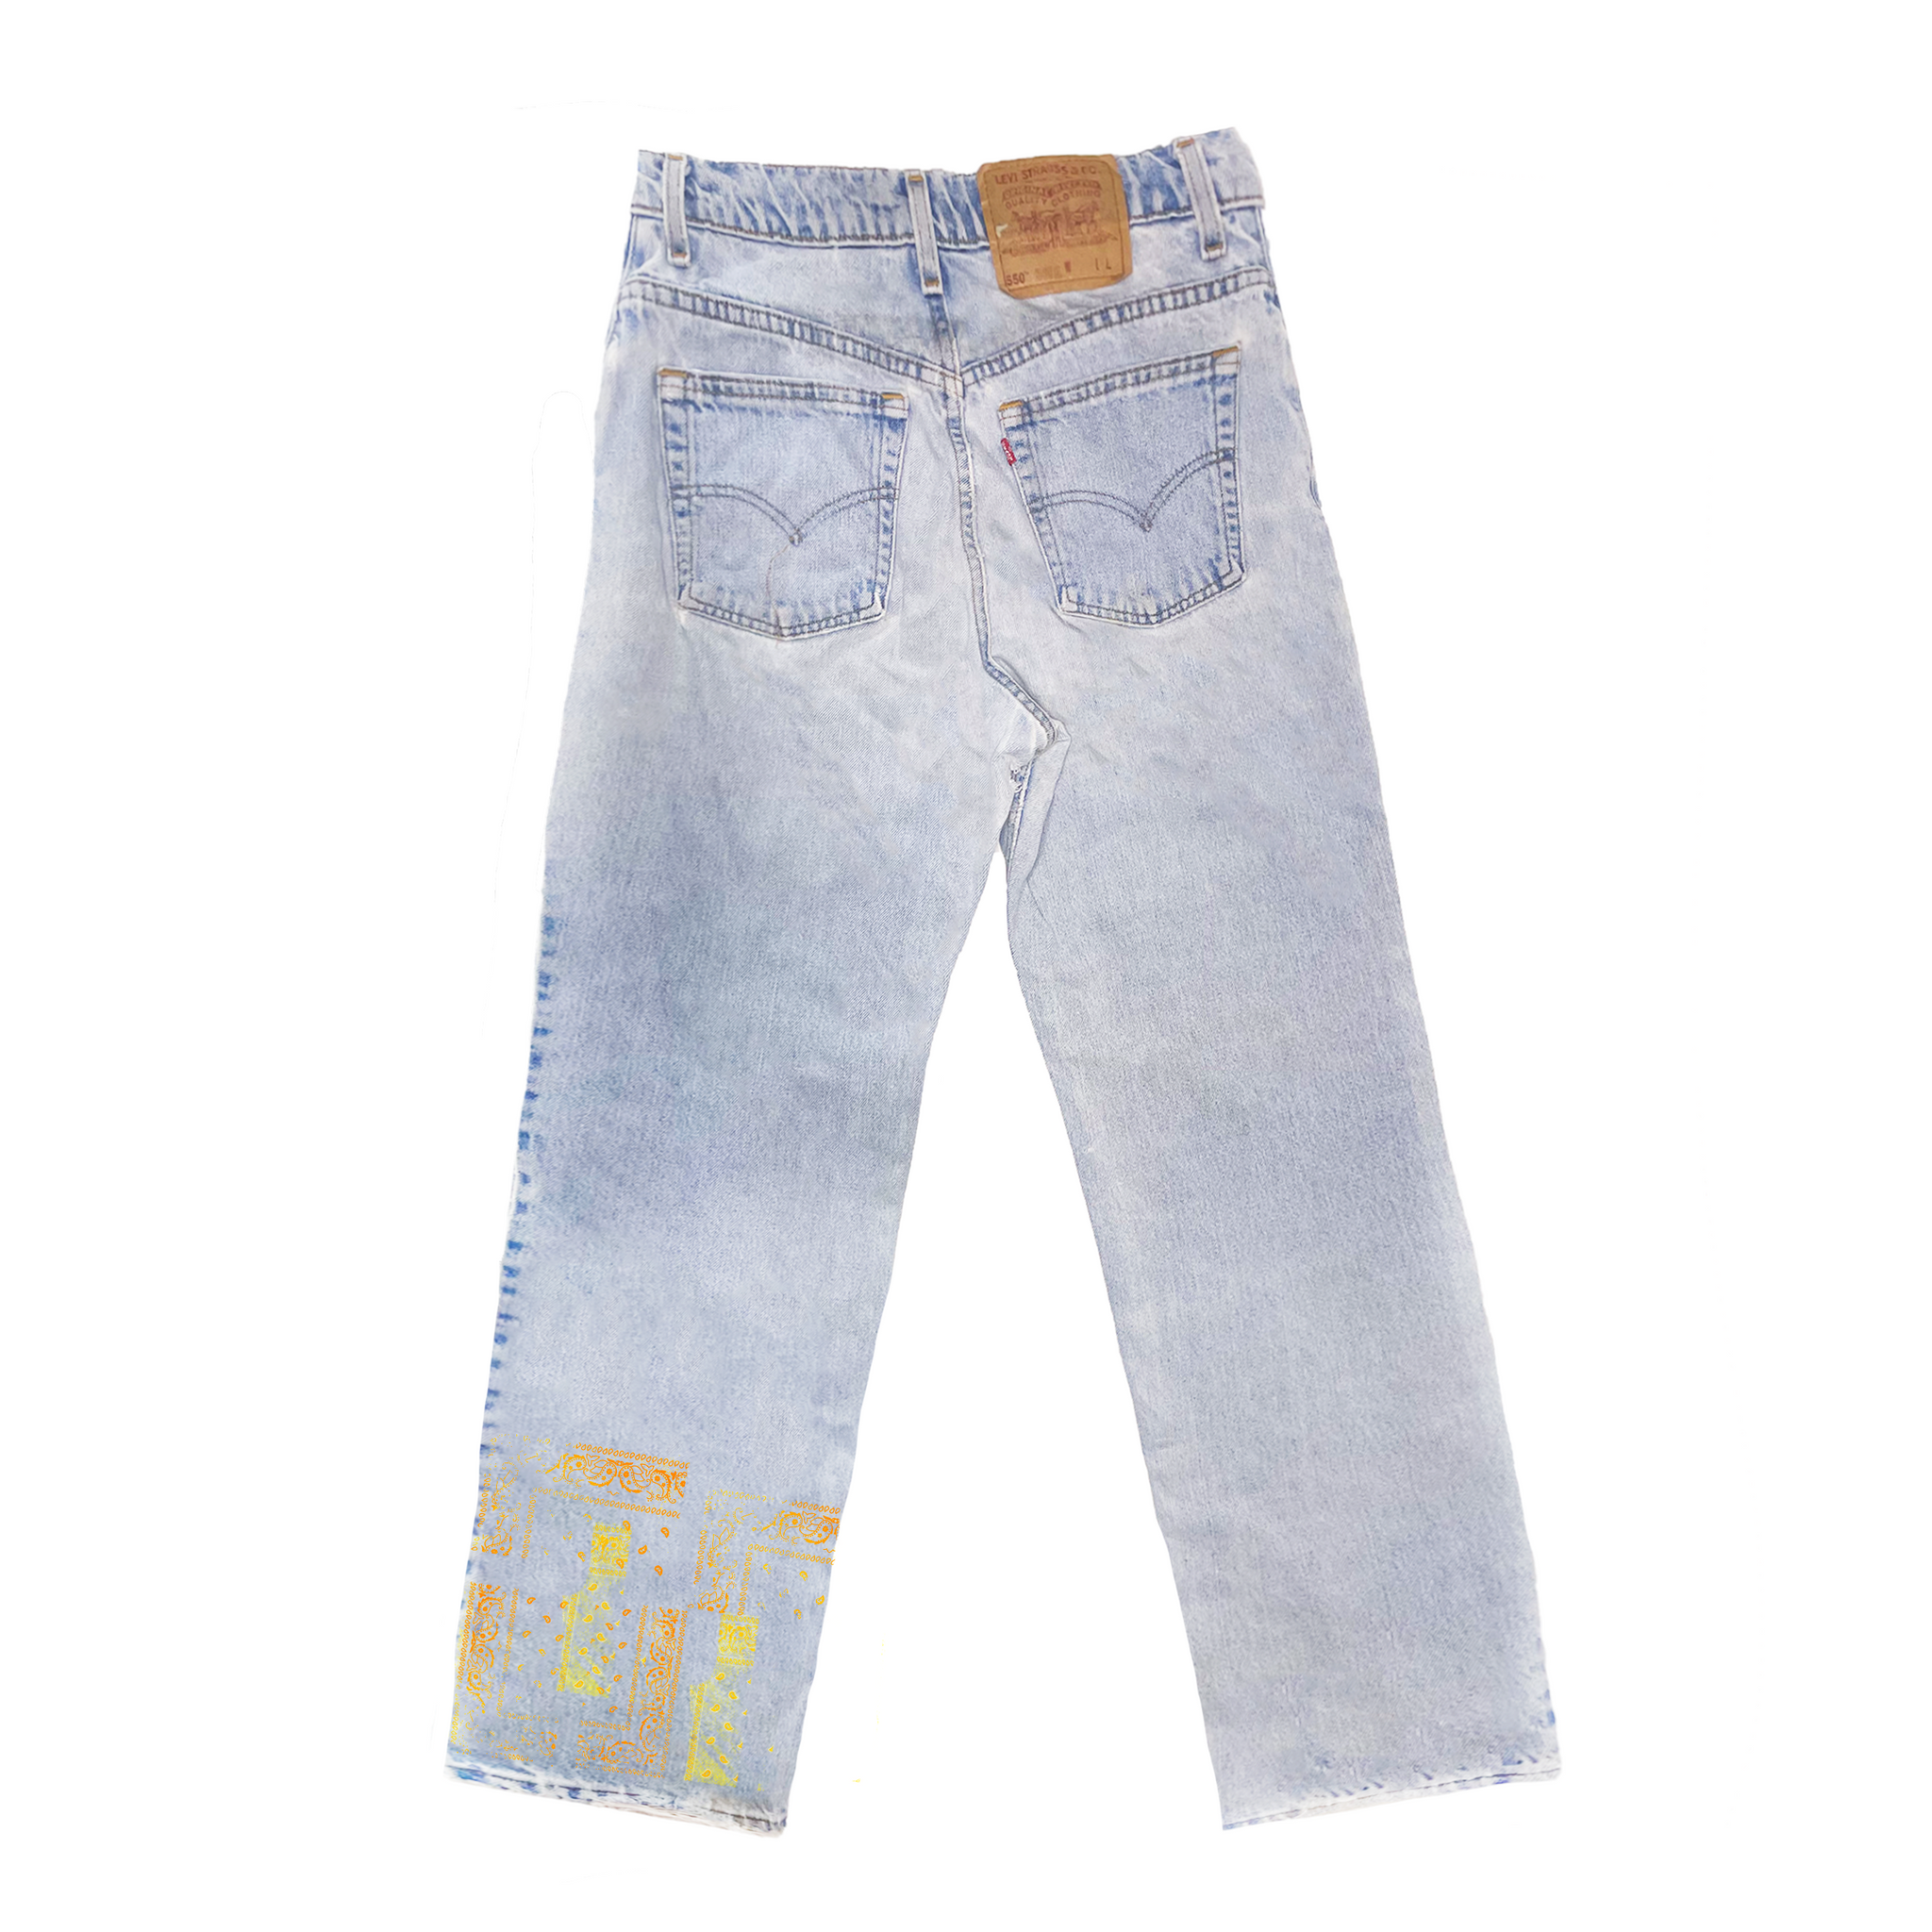 550 Reworked Jeans